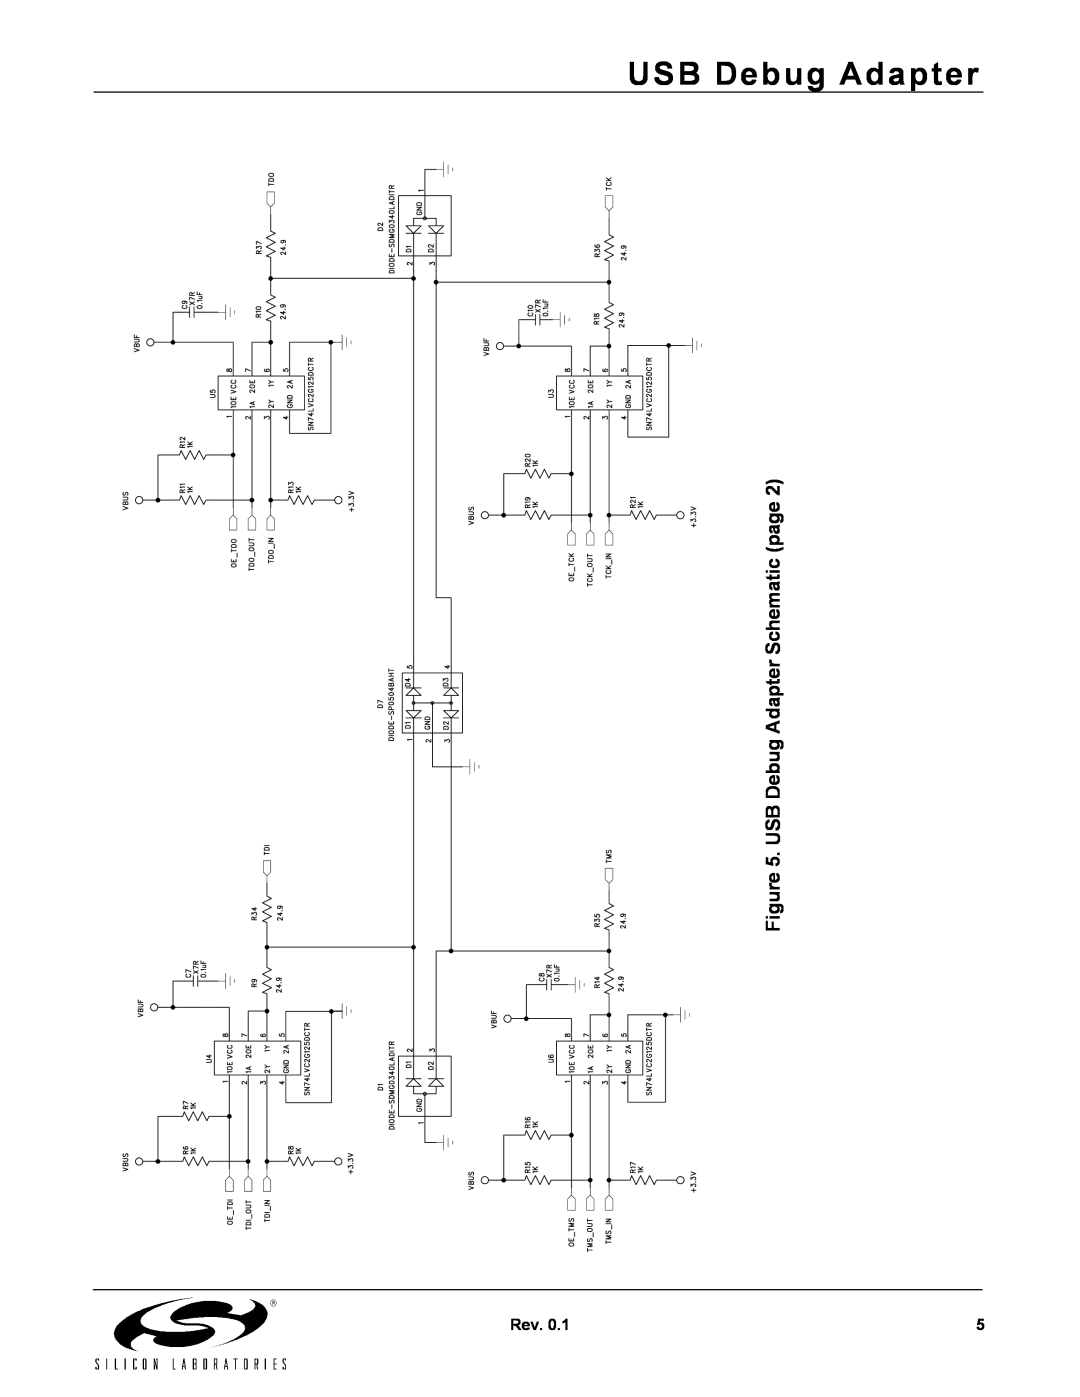 Silicon Laboratories Computer Accessories specifications USB Debug Adapter Schematic page 